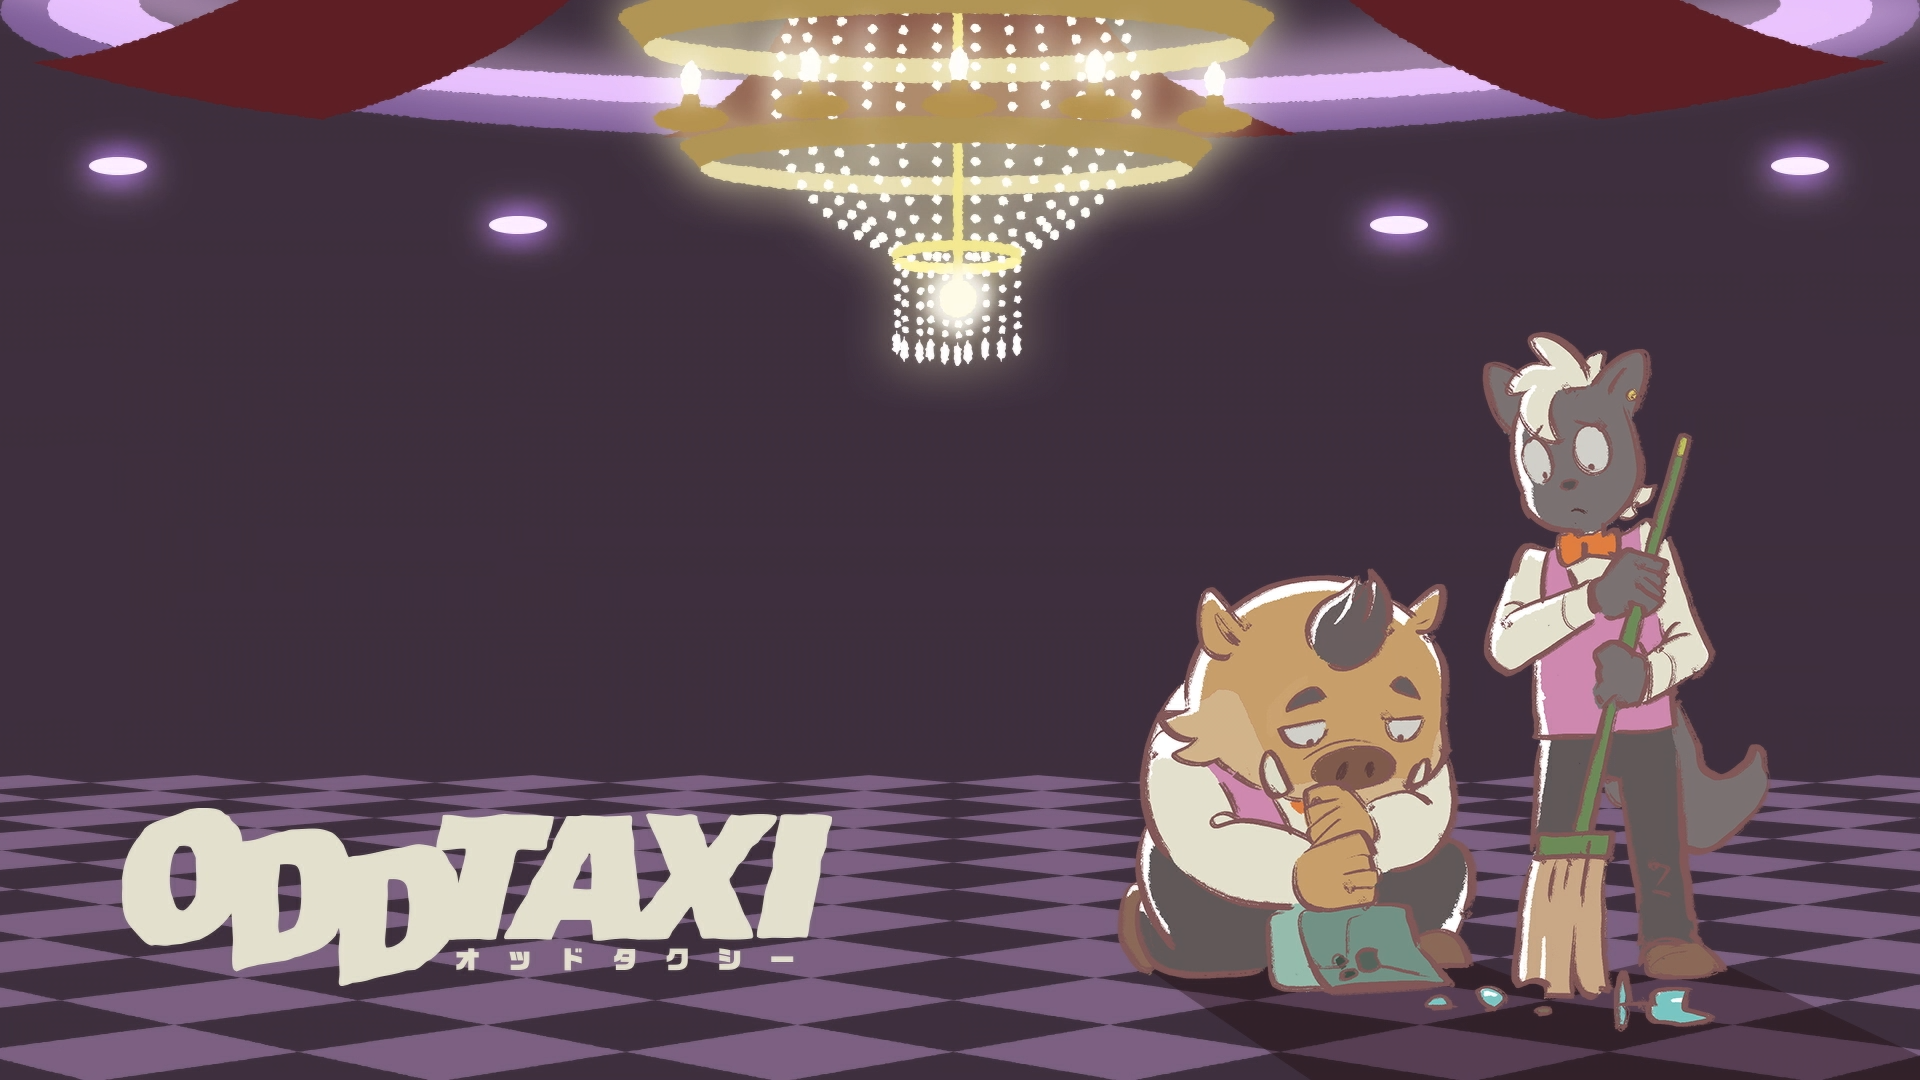 Episode Odd Taxi Image Gallery Animevice